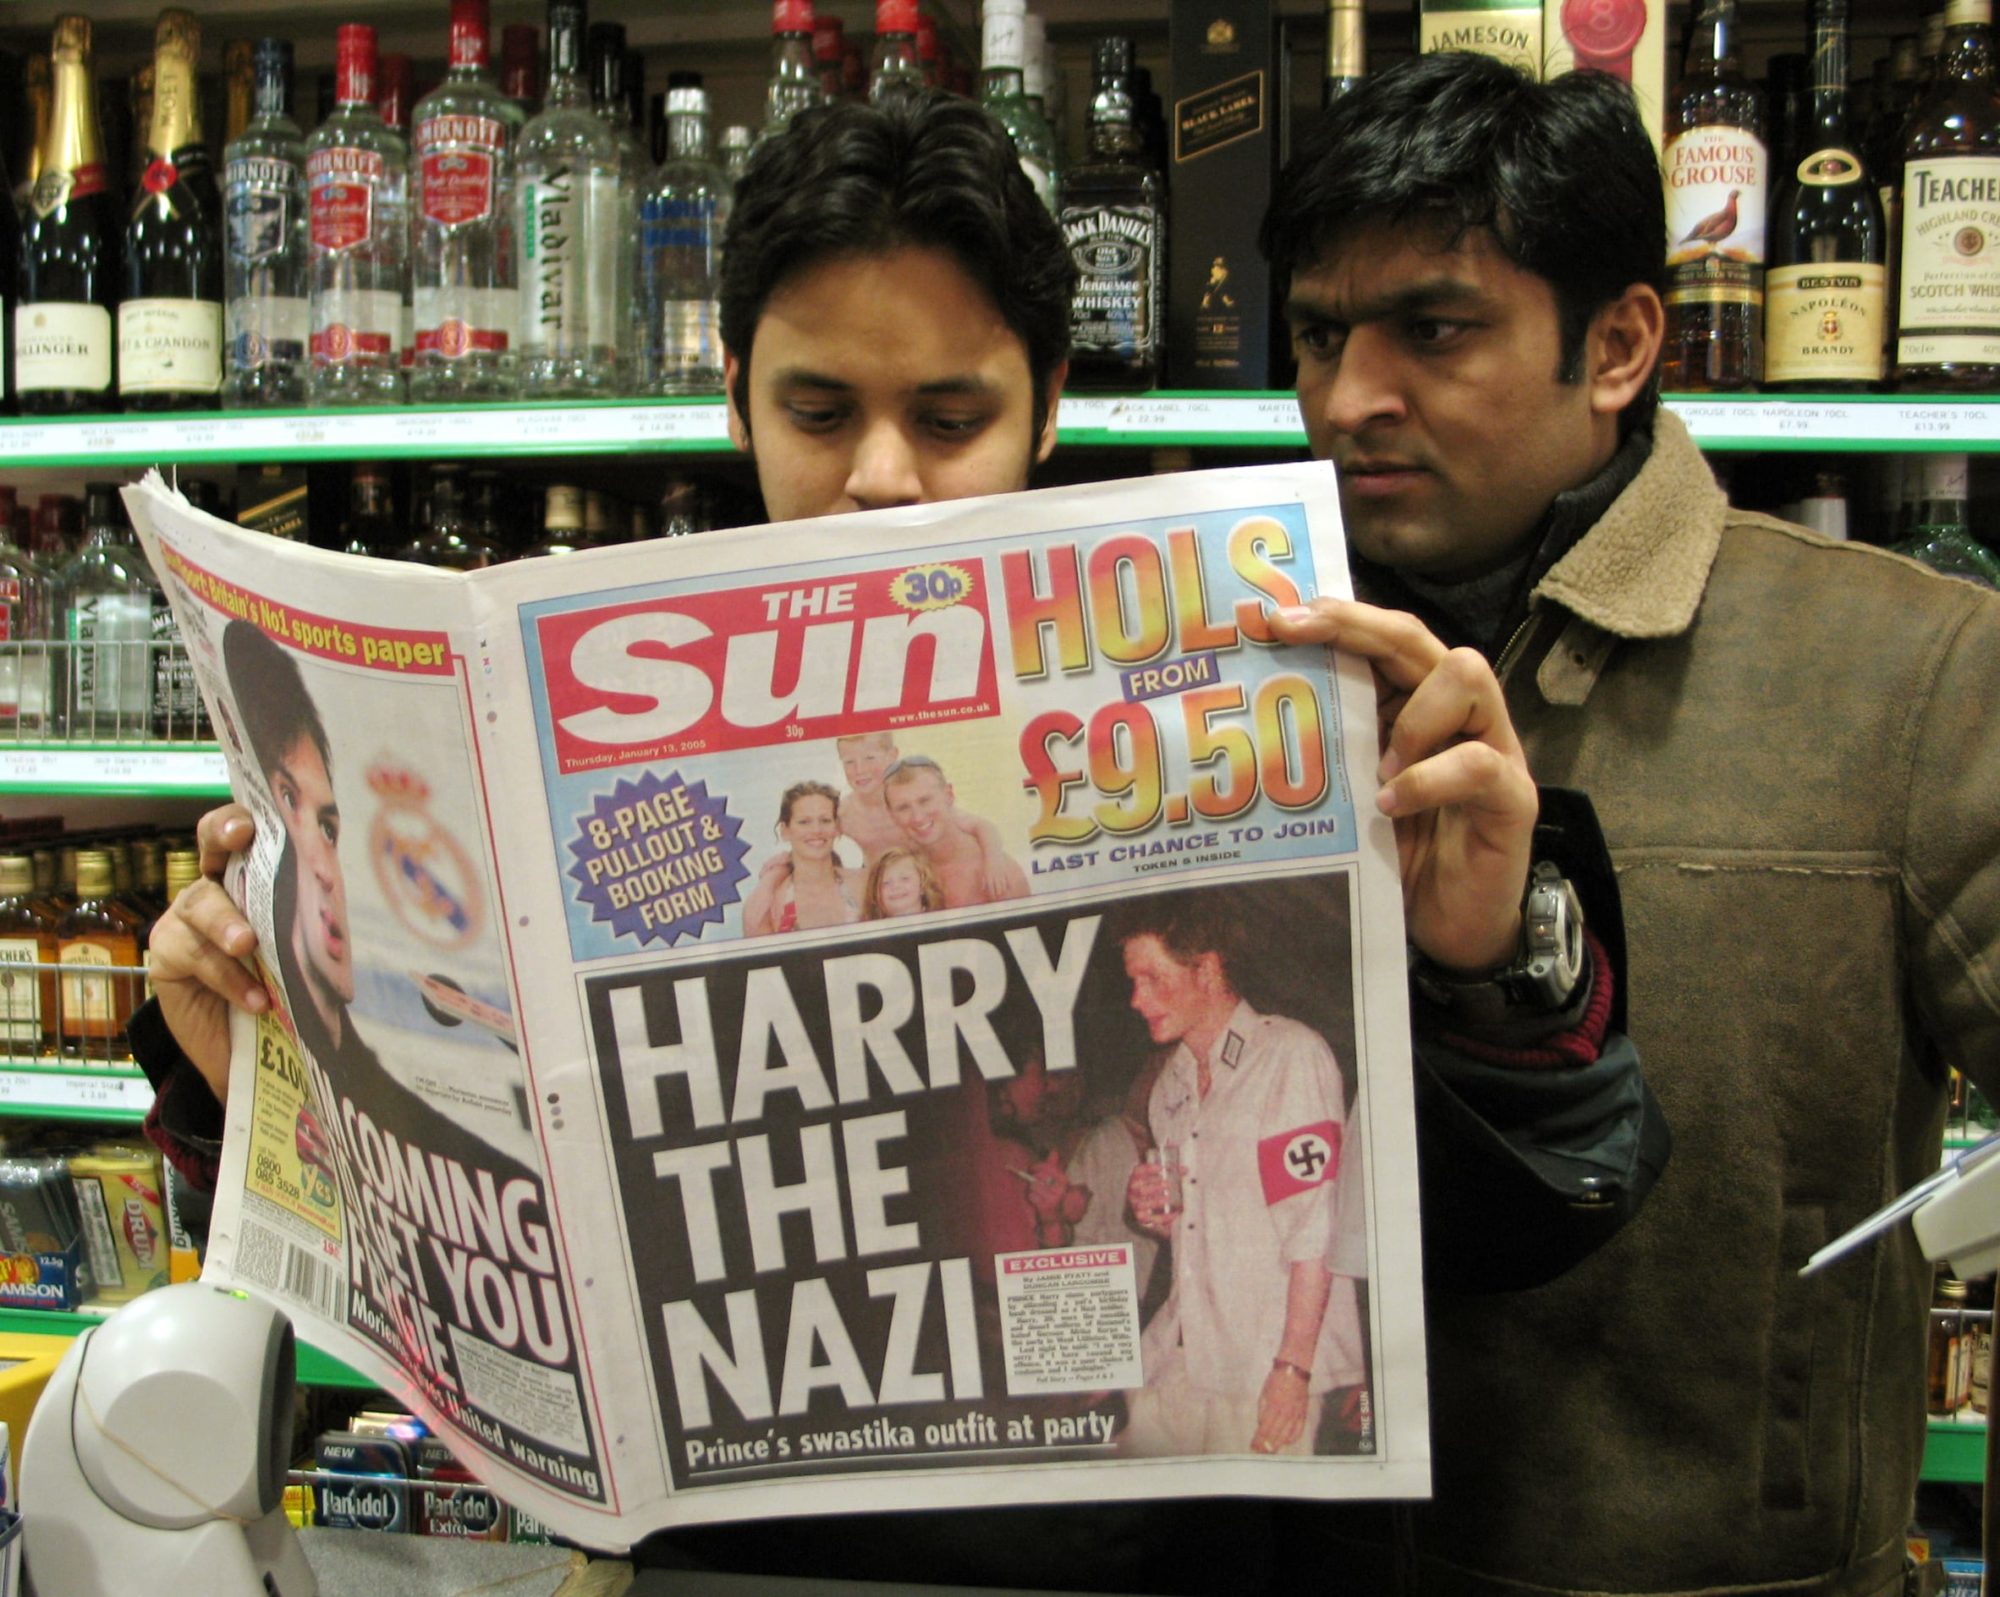 Newsagents Khan and Mohammad Ahmed read a copy of 'The Sun' tabloid in London showing Prince Harry in a Nazi uniform.  Newsagents Khan and Mohammad Ahmed (L) read a copy of 'The Sun' tabloid in London, January 13, 2005, whose front page shows a picture of Britain's Prince Harry wearing a Nazi uniform with a red and black swastika armband during a party at a friend's house on Saturday. Britain's Prince Harry apologised on Thursday after he wore the Nazi uniform to a costume party two weeks before Queen Elizabeth is due to lead the country's holocaust memorial events. REUTERS/David Loh - RP5DRIFXPDAA